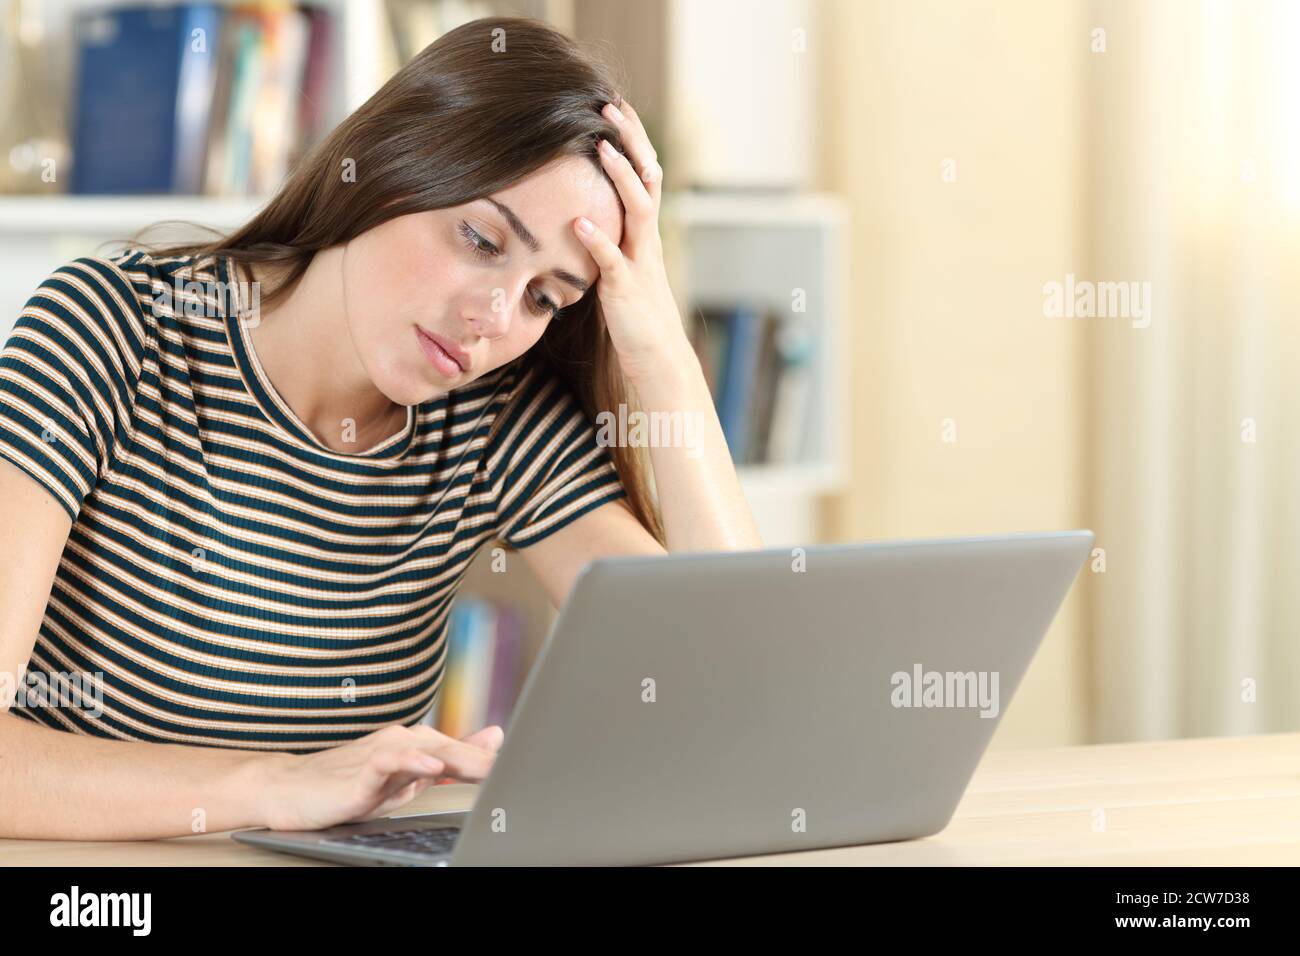 Tired teen using a laptop on a desk in the living room at home Stock Photo